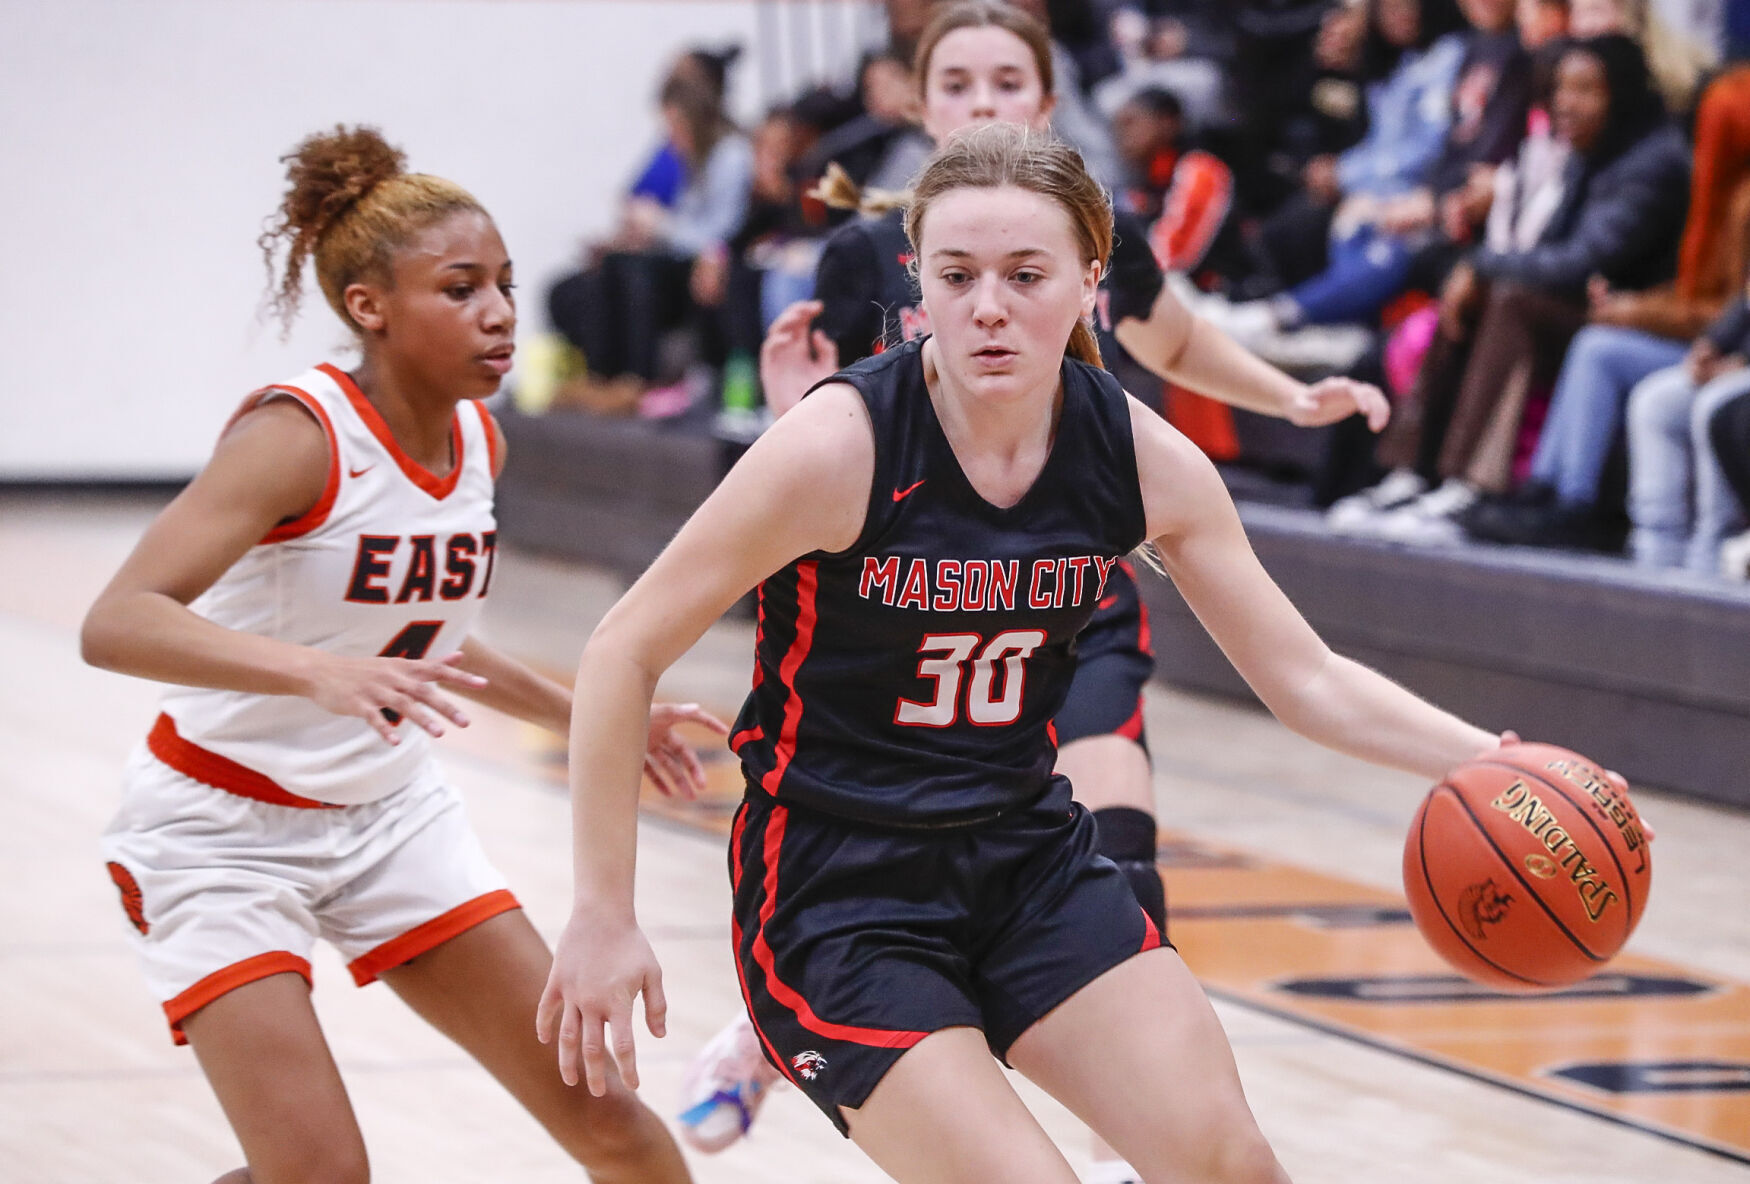 Waterloo East boys snatch victory, Riverhawk girls dominate in close game